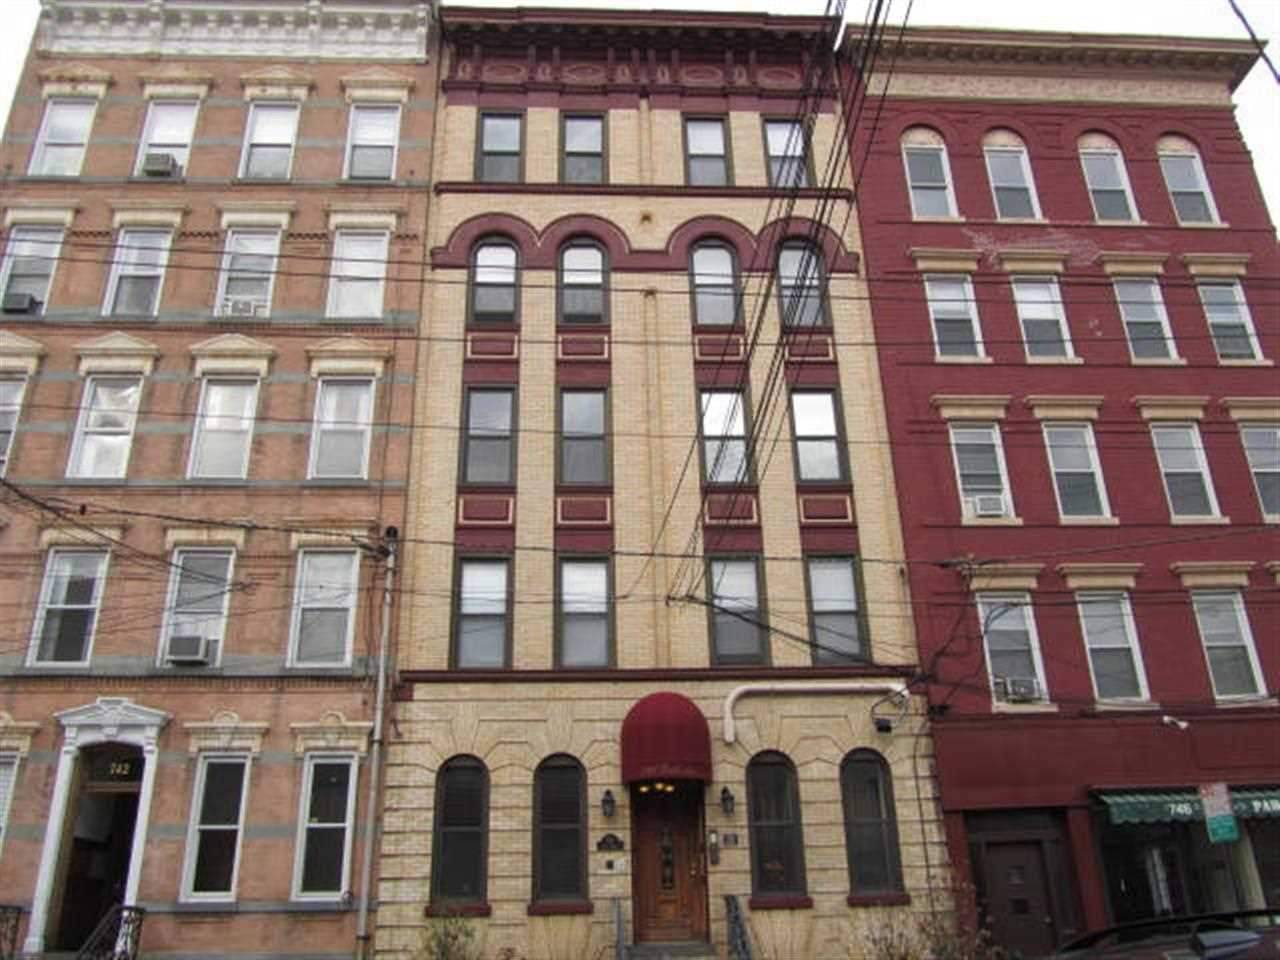 Exceptional 2B/1B condo in the heart of Hoboken - 2 BR New Jersey